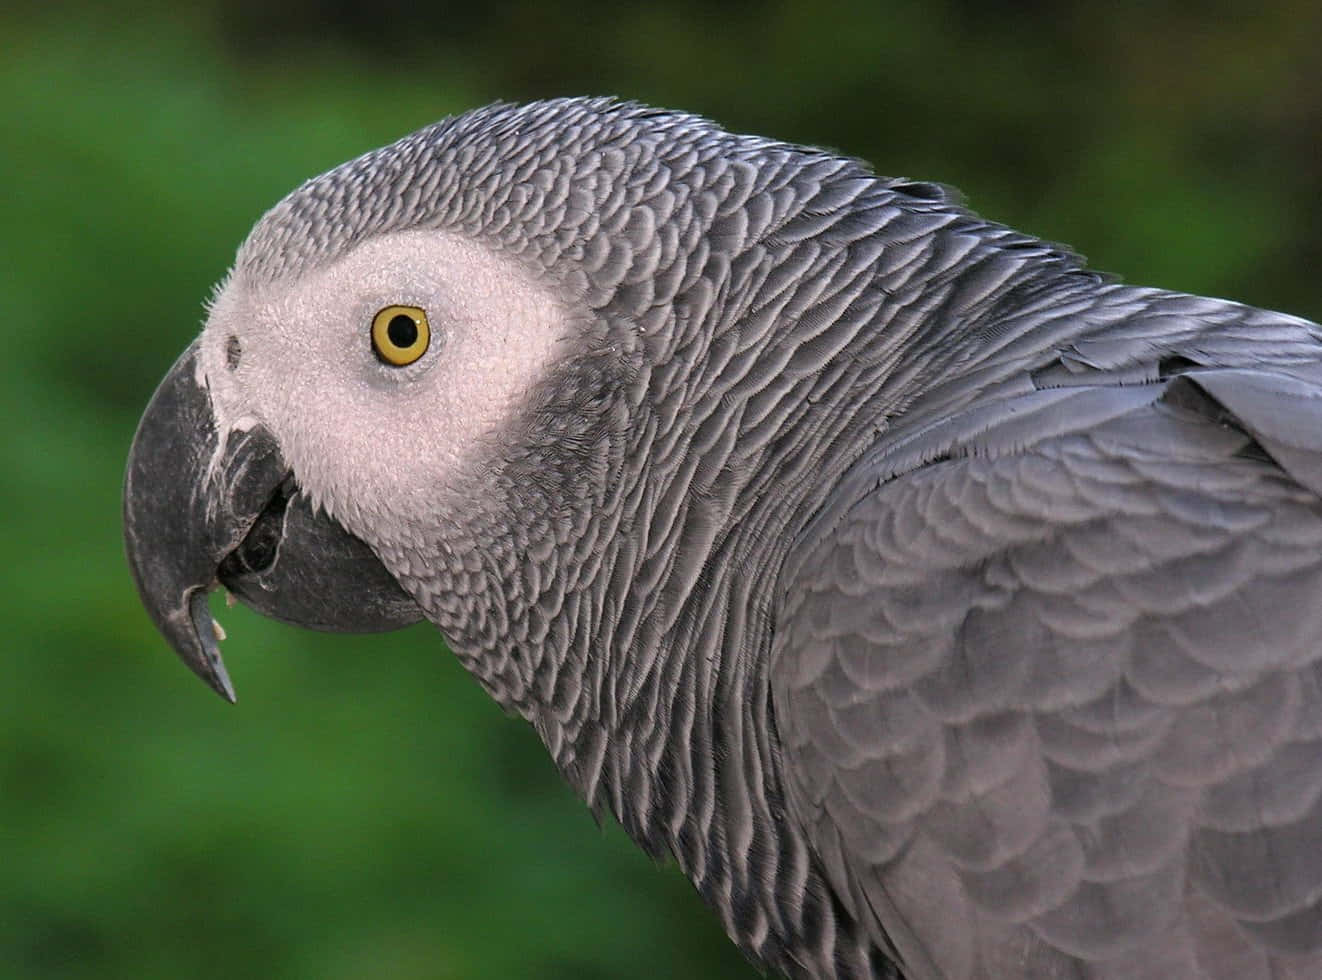 A Grey Parrot With Yellow Eyes